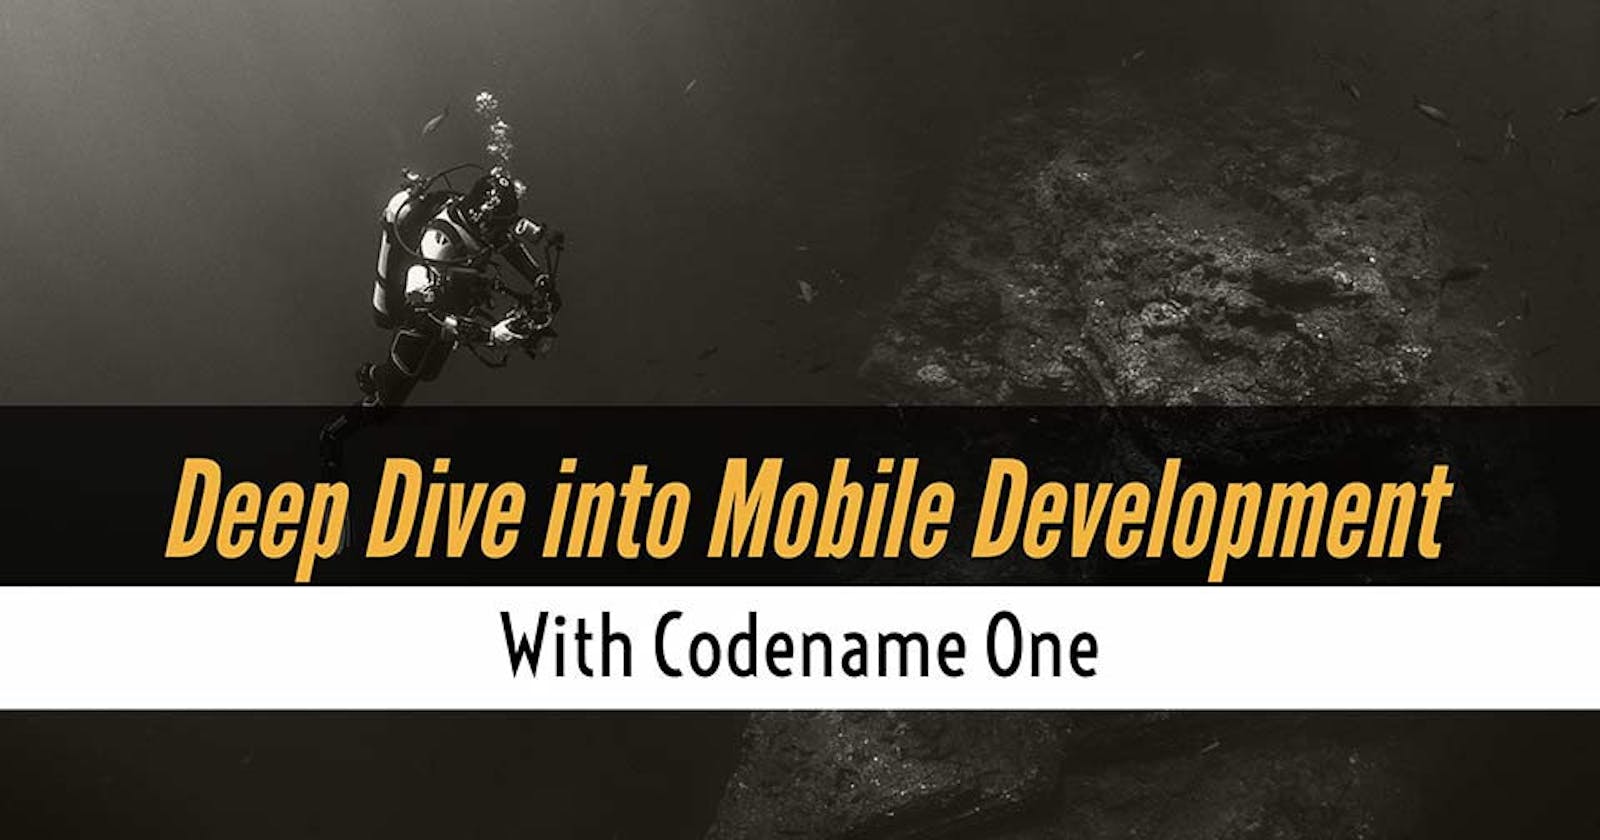 Deep Dive into Mobile Development with Codename One - Free Online Course Material